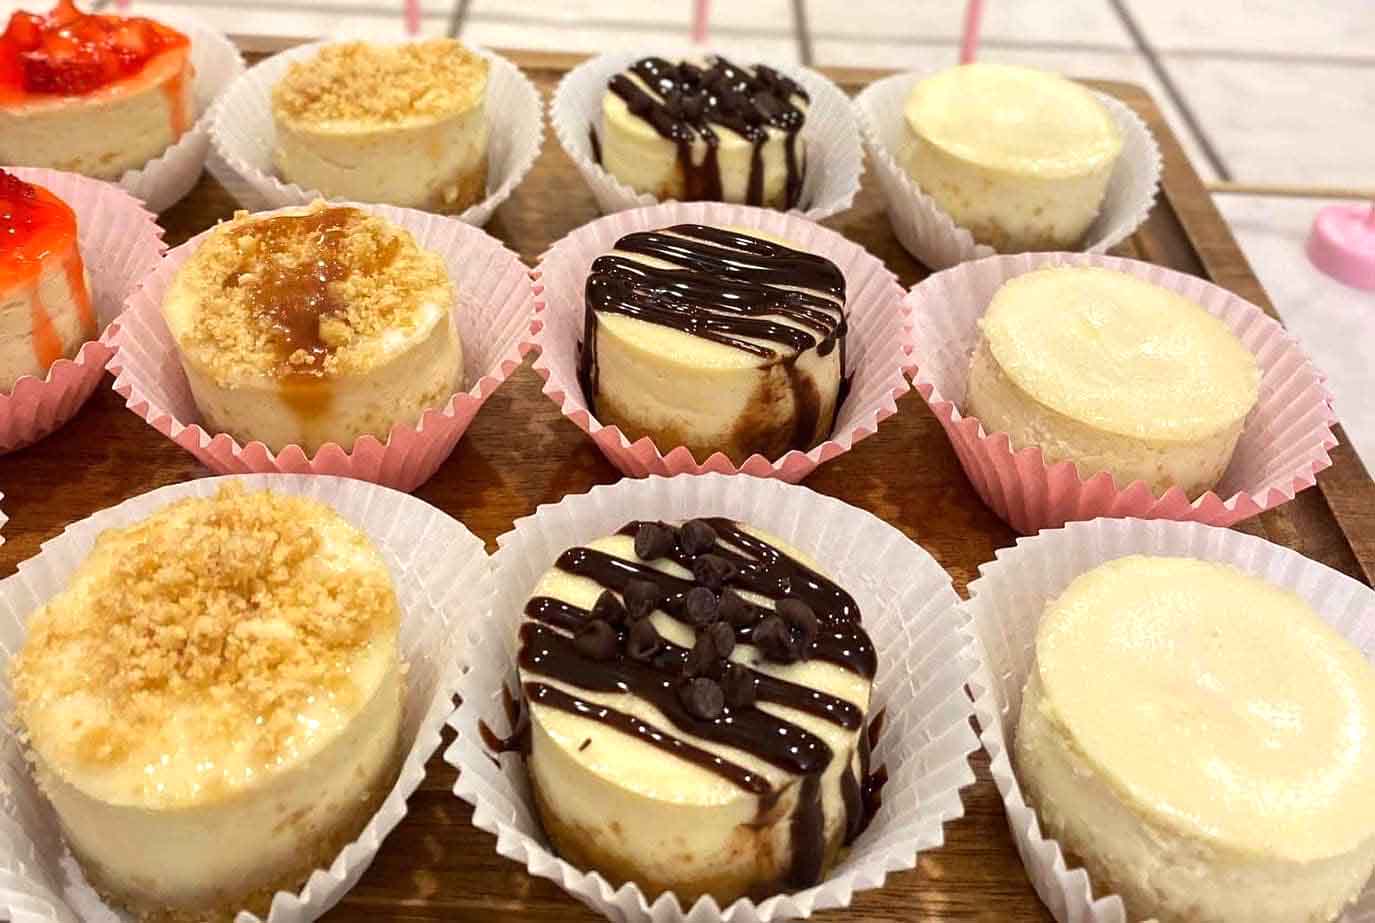 Array of cheesecakes